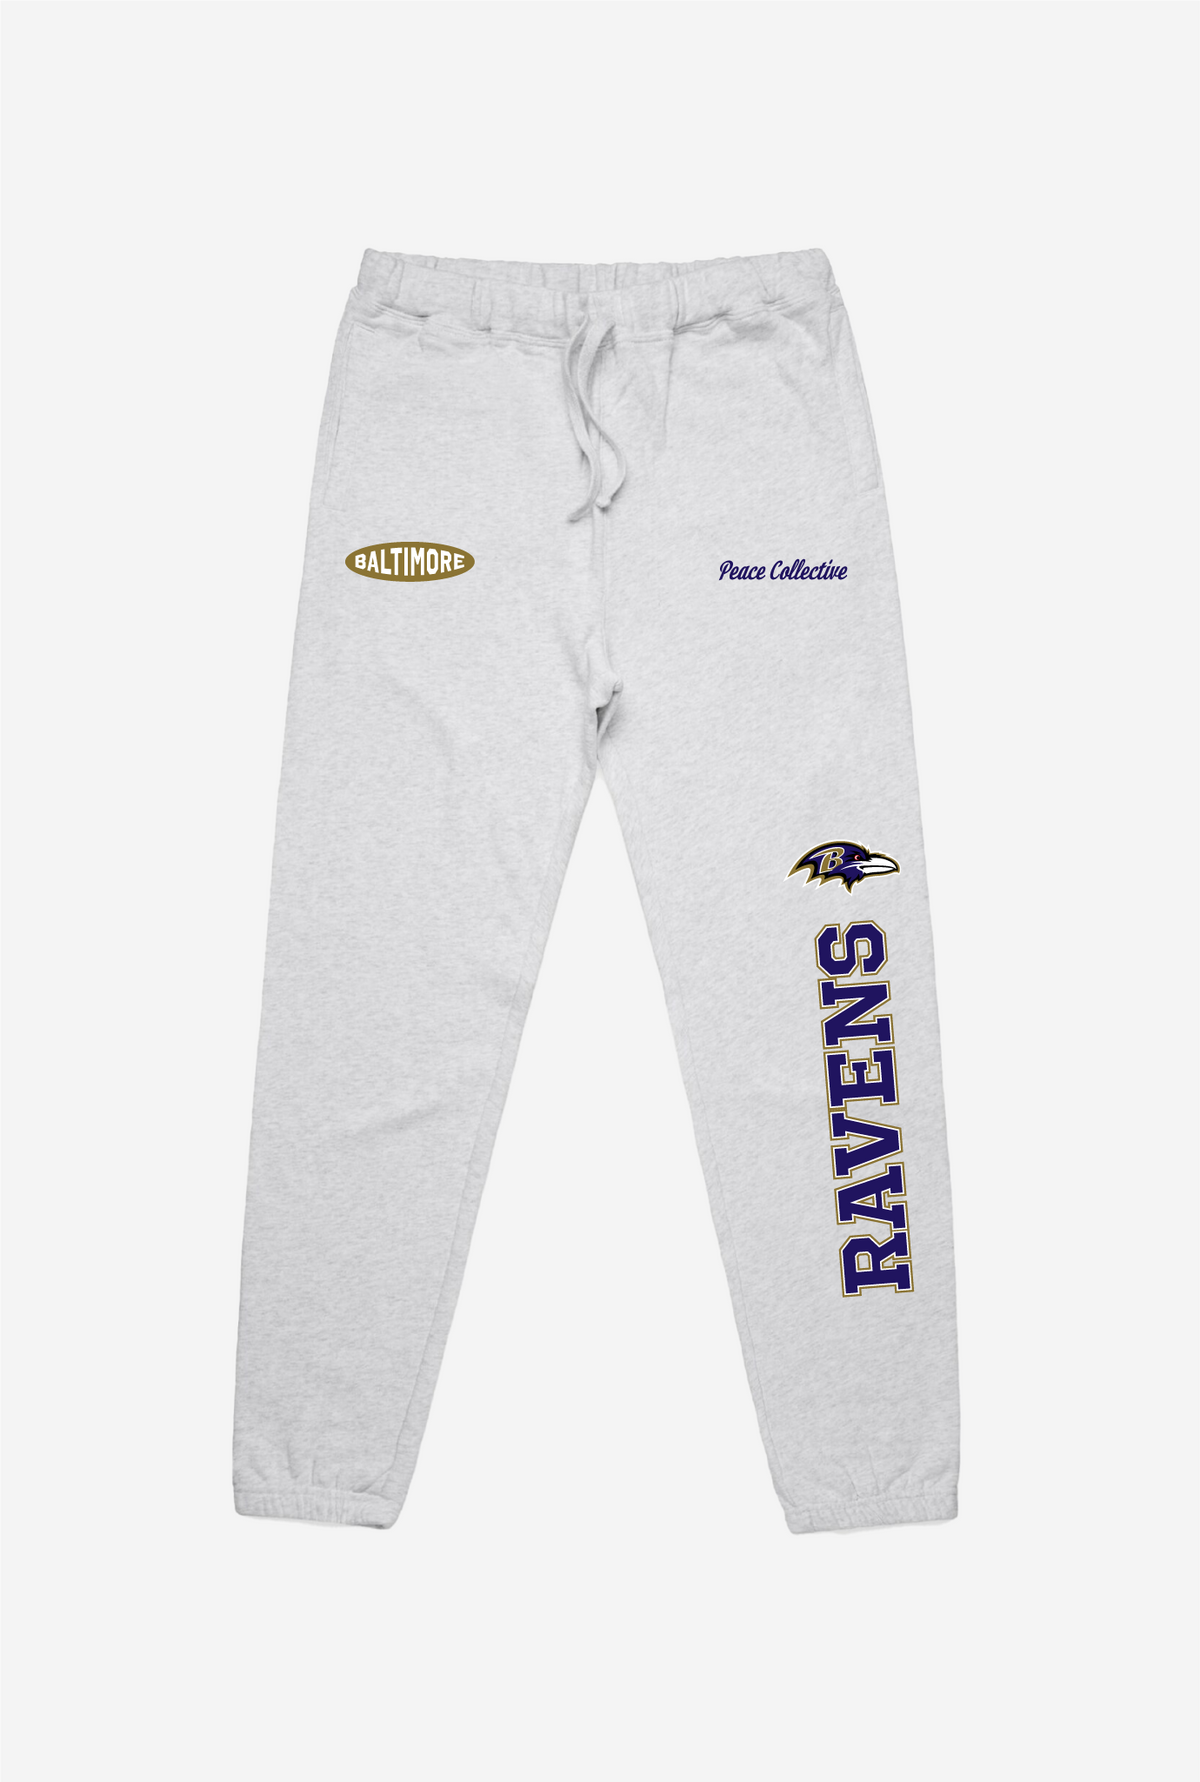 Baltimore Ravens Washed Graphic Joggers - Ash